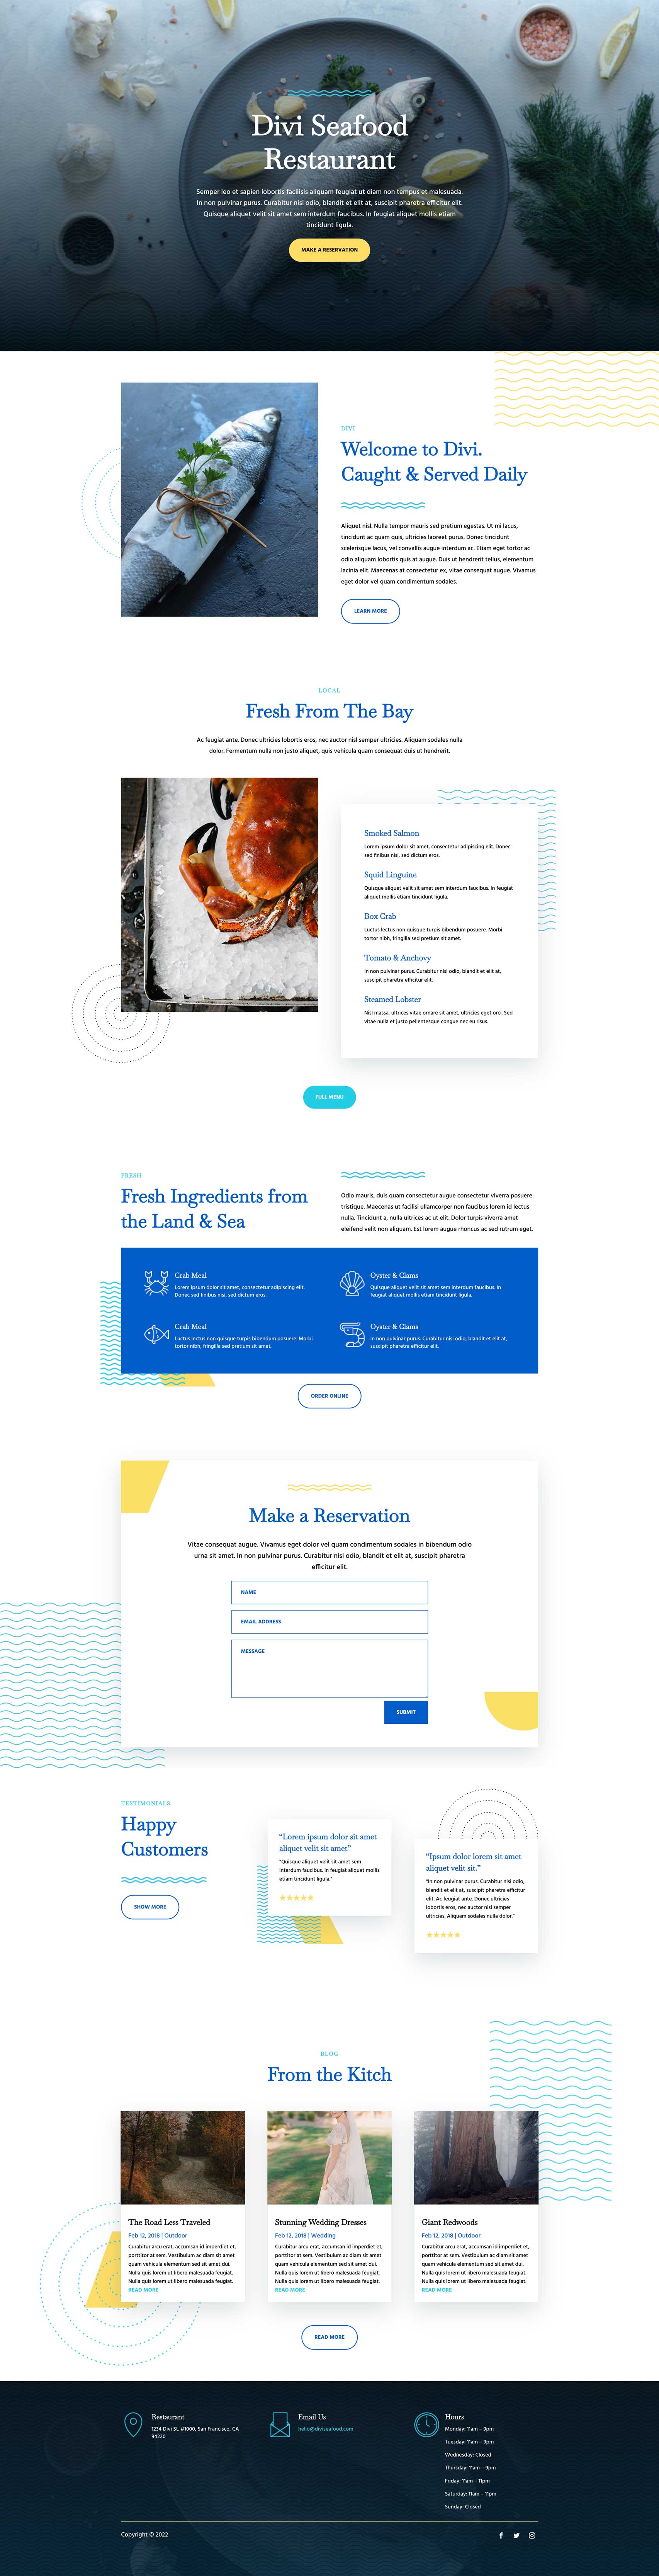 seafood-restaurant-landing-page Get a FREE Seafood Restaurant Layout Pack for Divi